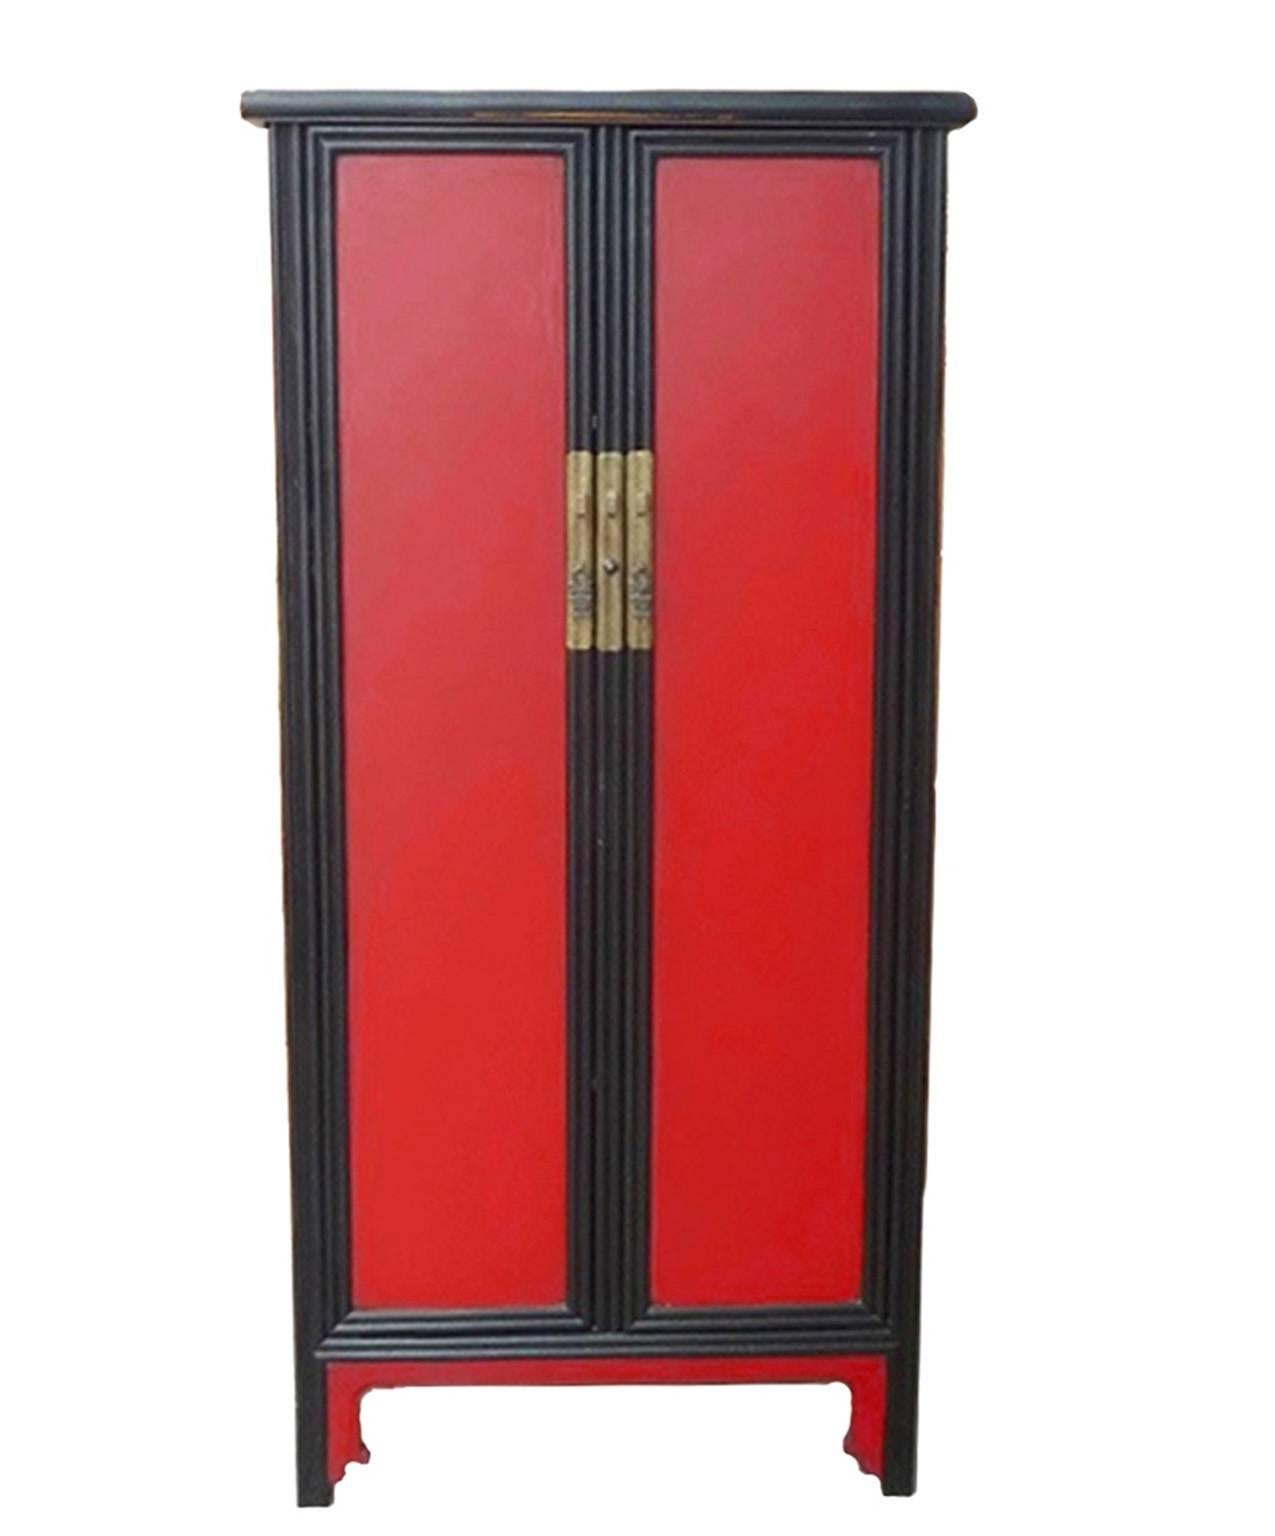 This beautiful cabinet is a great example of Ming Dynasty's simple and elegant furniture design. Contrasting red and black color makes it a fantastic focal point. Removable centre bar makes storing large items a breeze. Ample storage is provided by